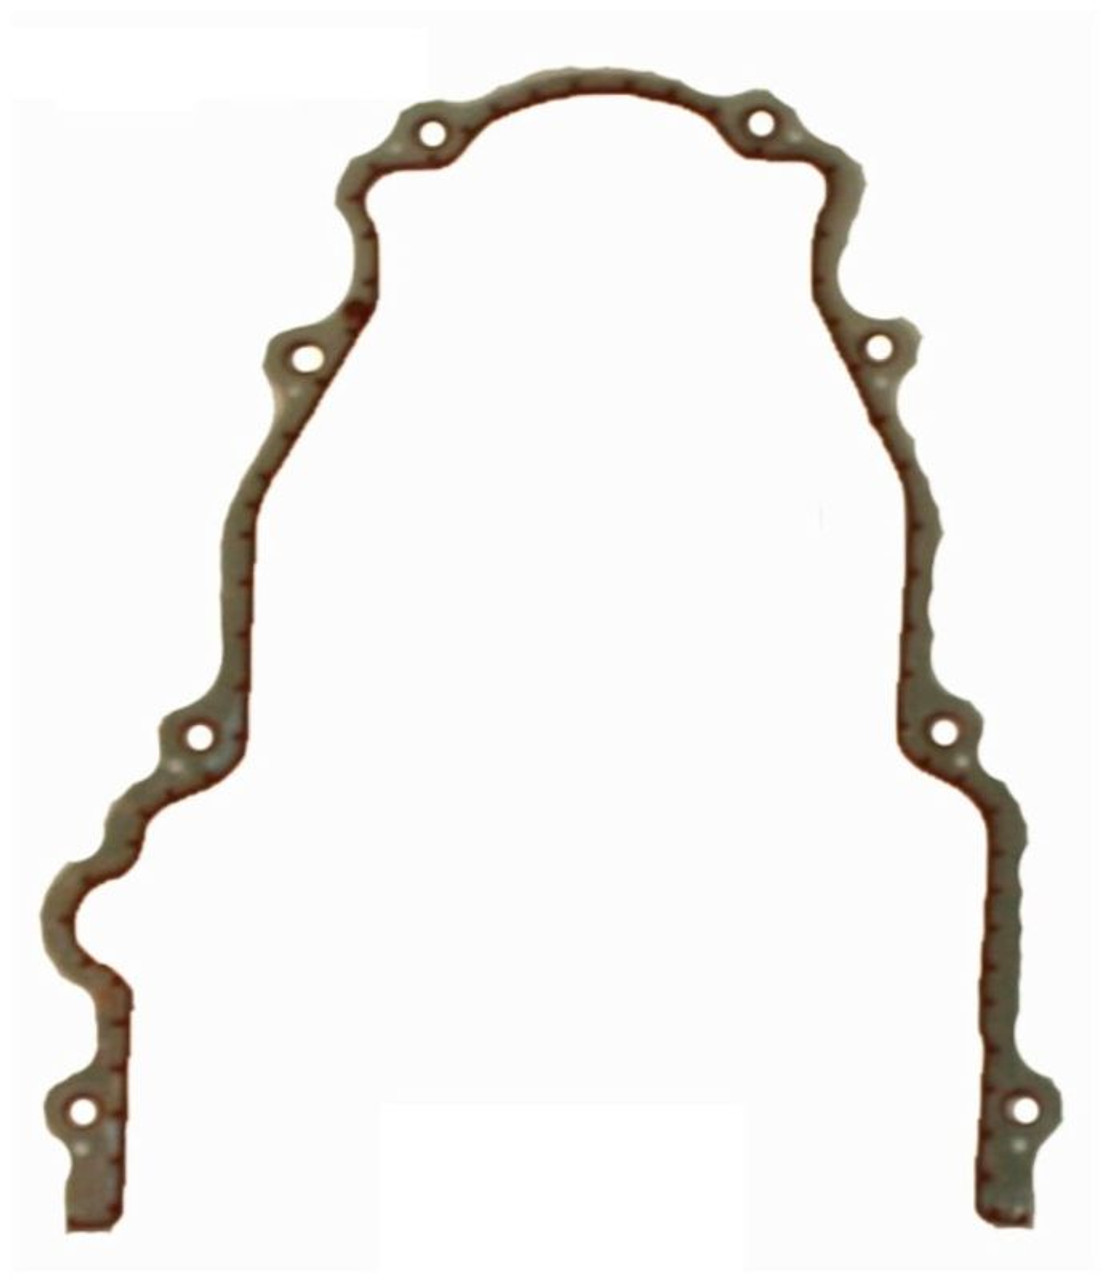 2009 Chevrolet Express 3500 6.0L Engine Timing Cover Gasket TCG293-A -558